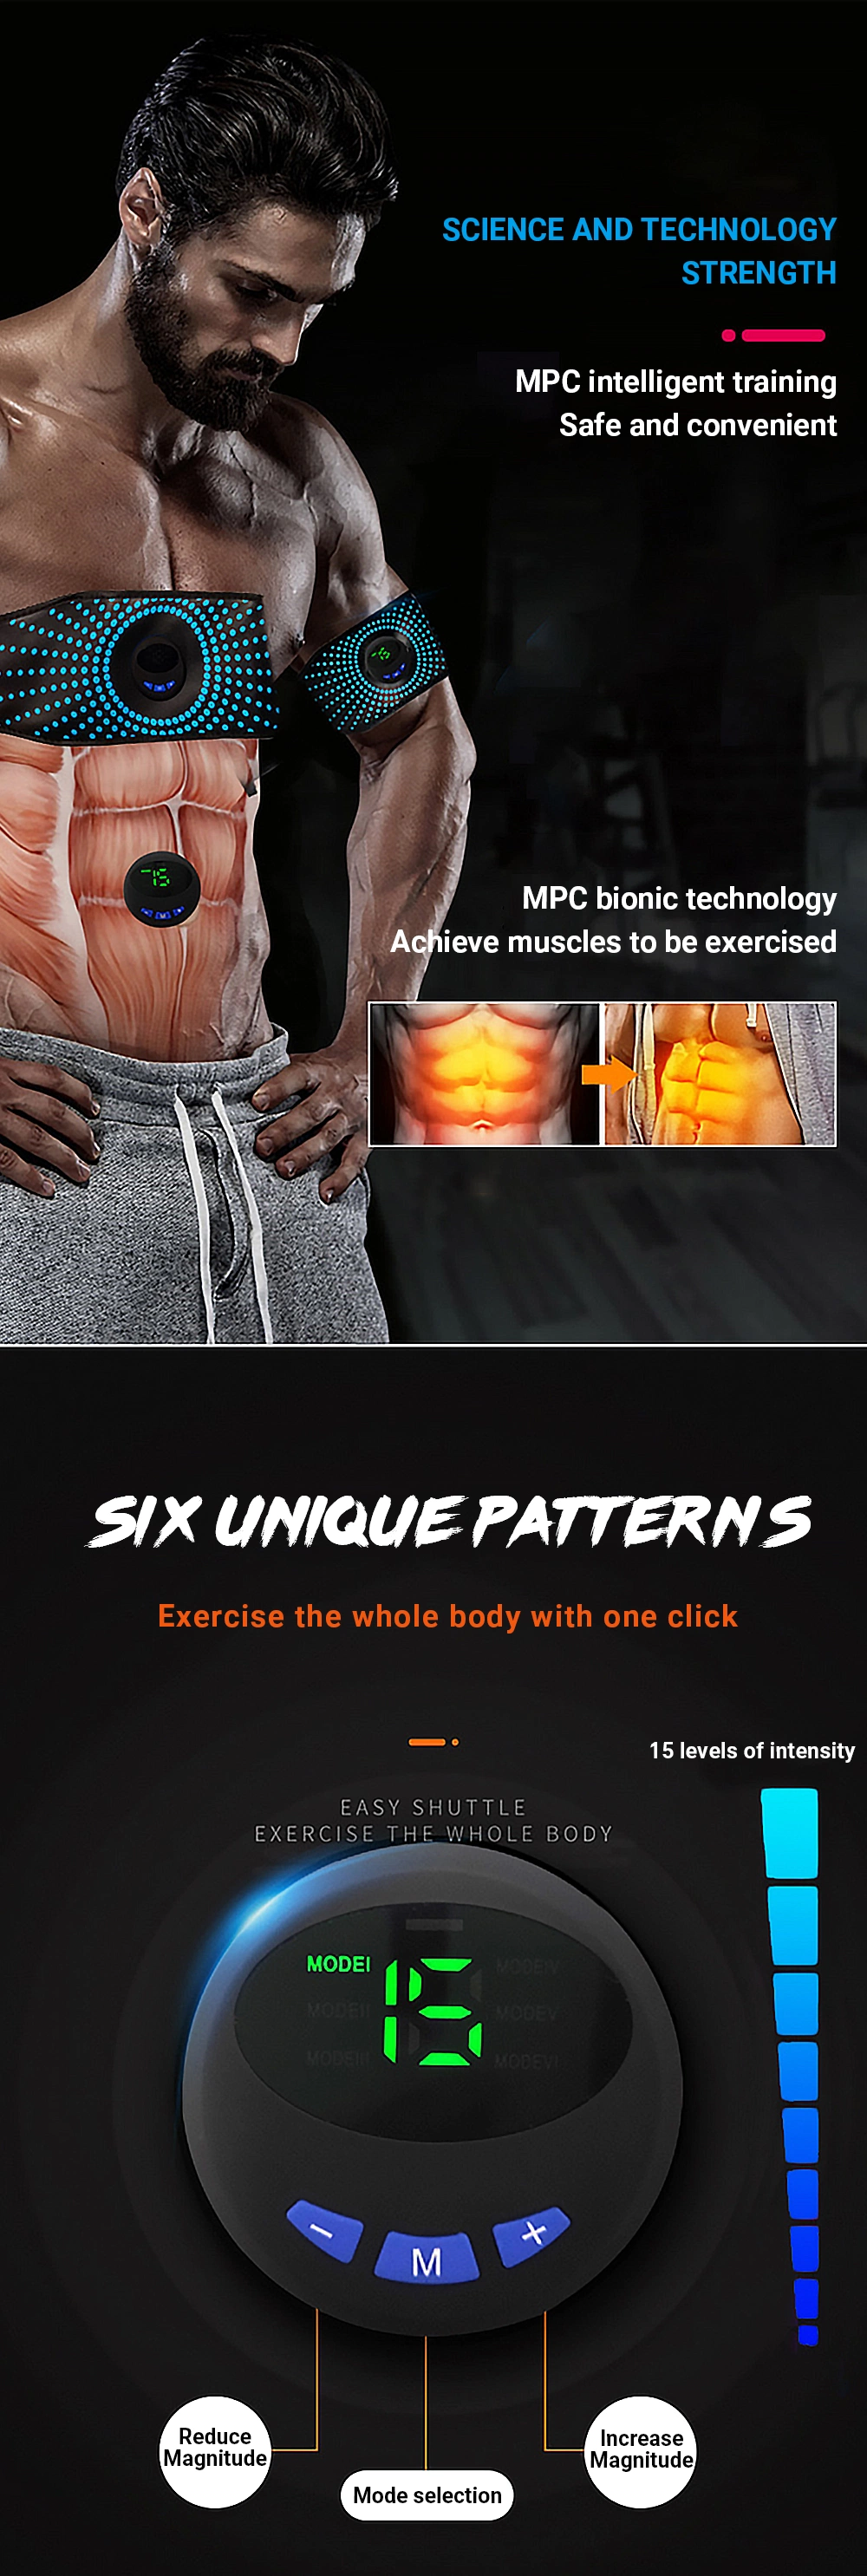 Mpc Intelligent Bionic Technology Exercises Waist Muscles Fat Loss and Body Shaping and Intelligent Fitness Waist Support Belts